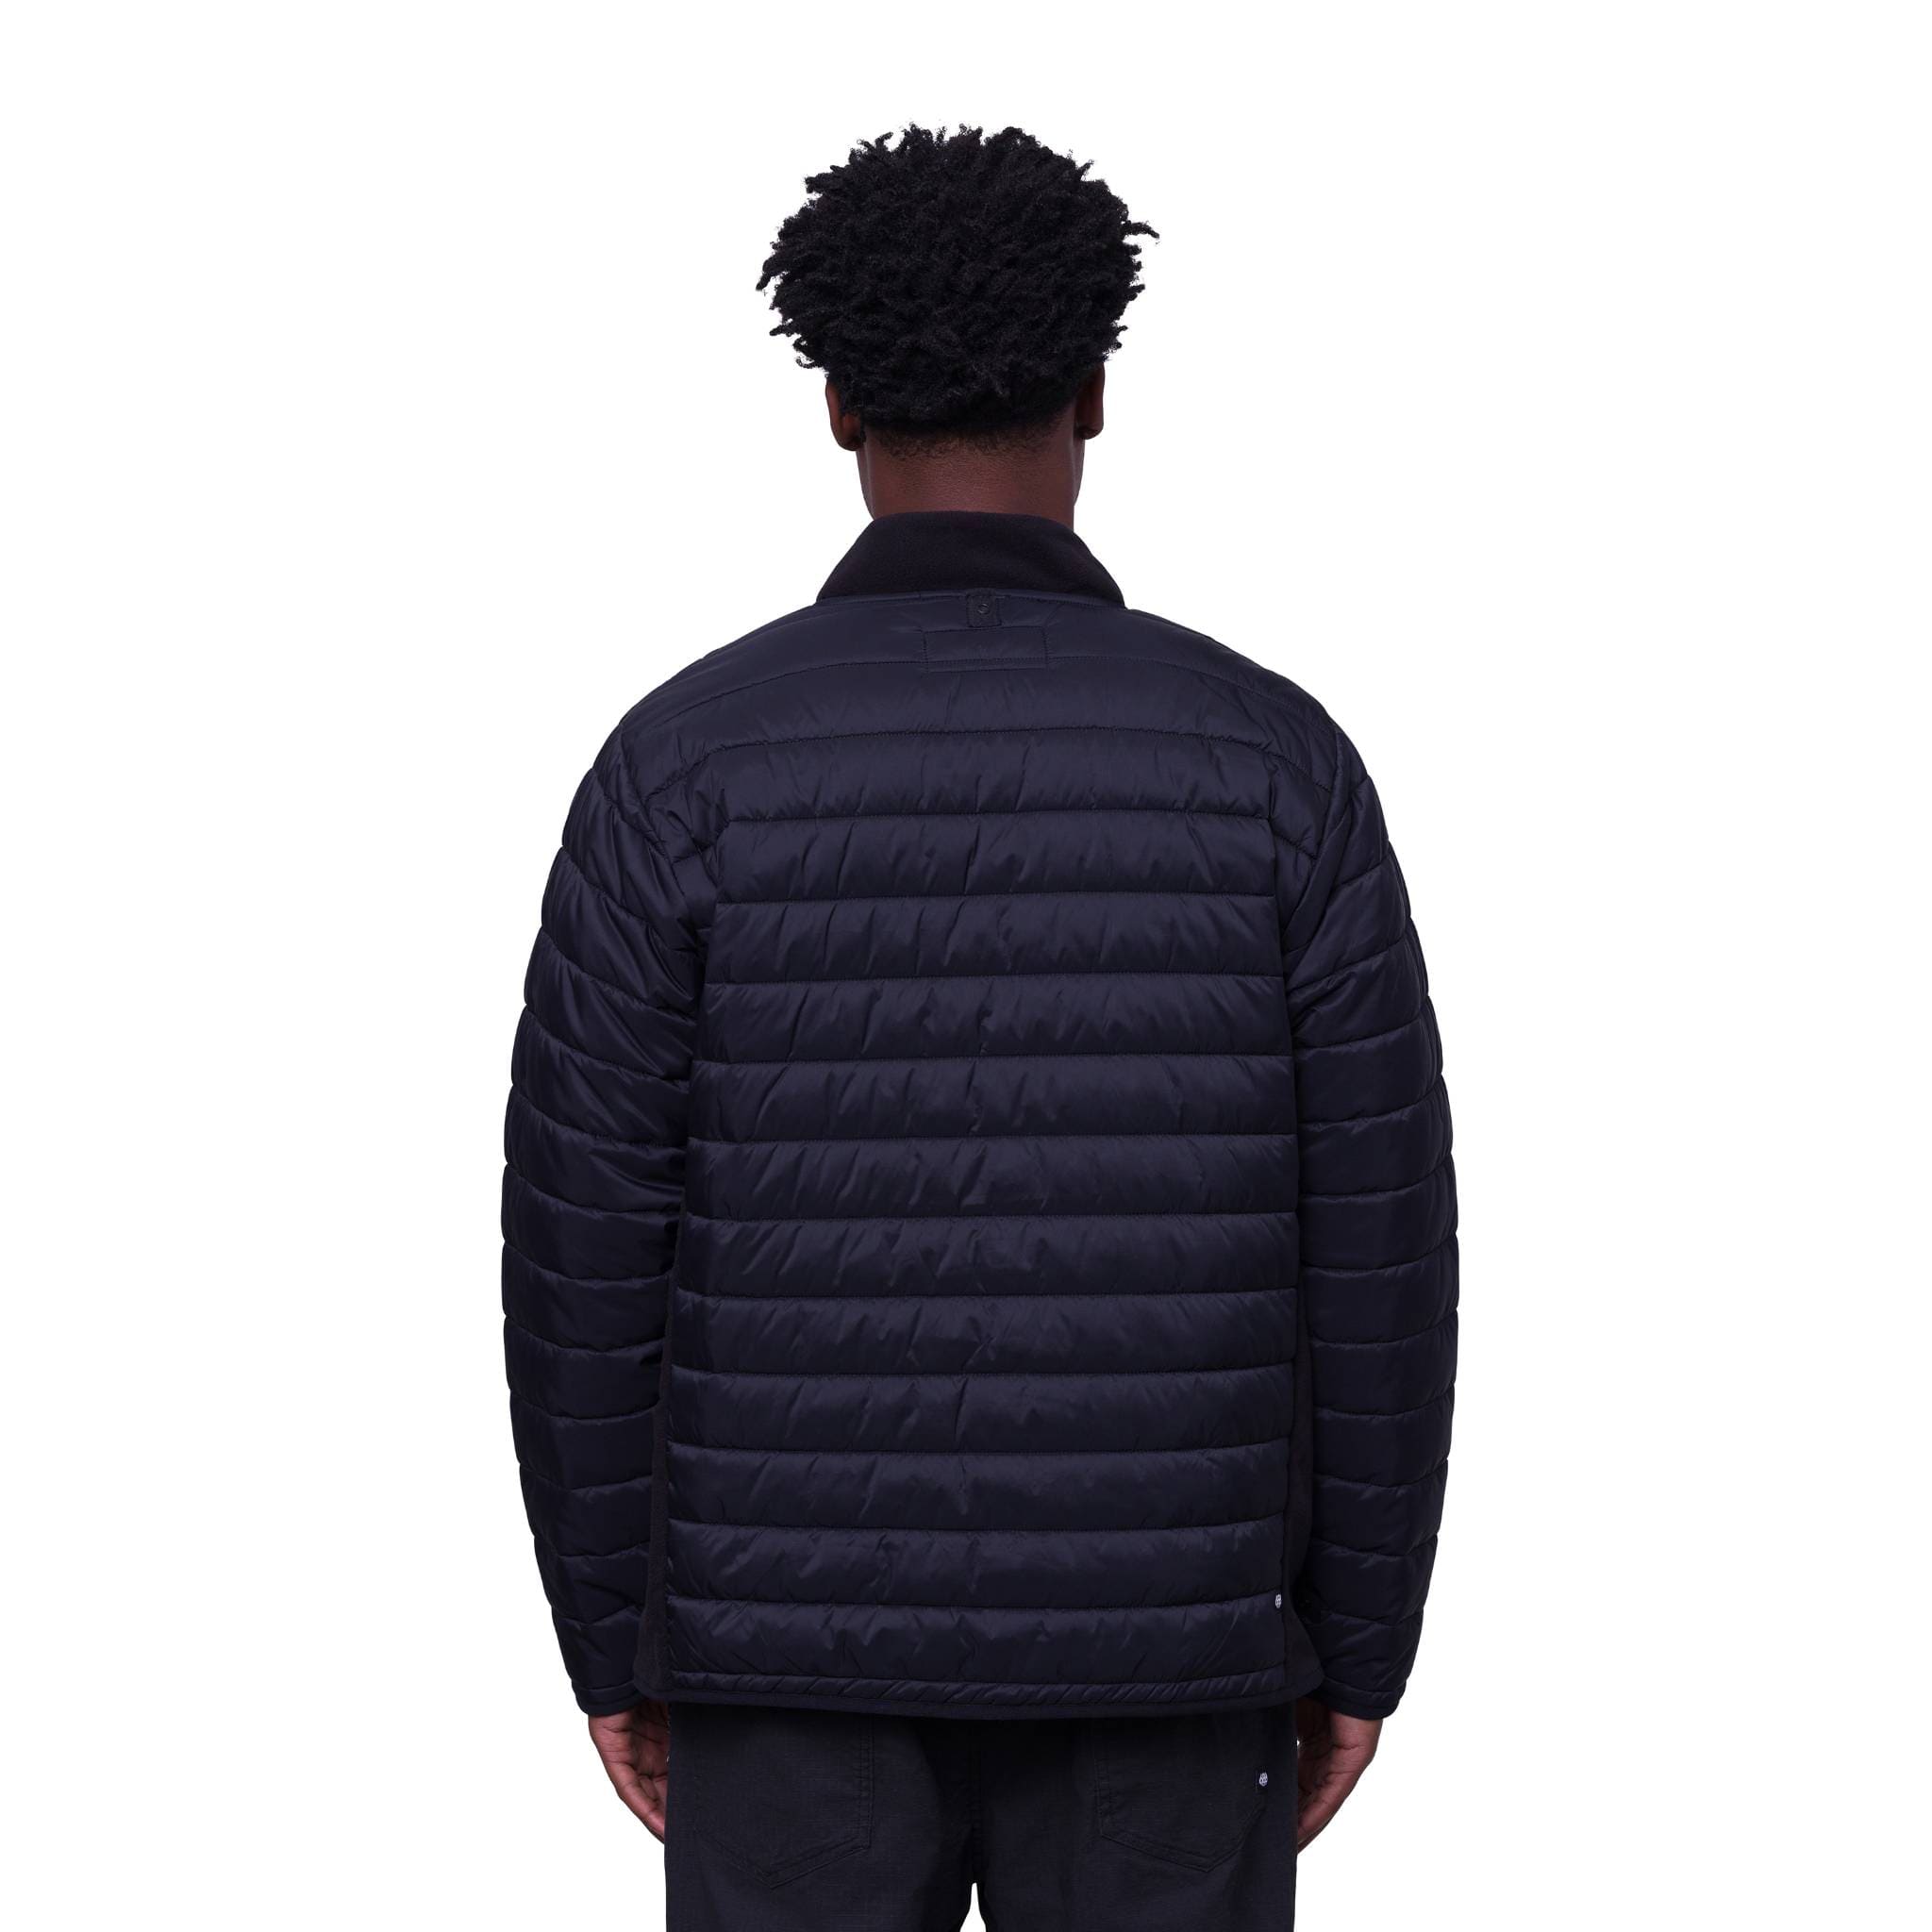 686 Thermal Puff Jacket